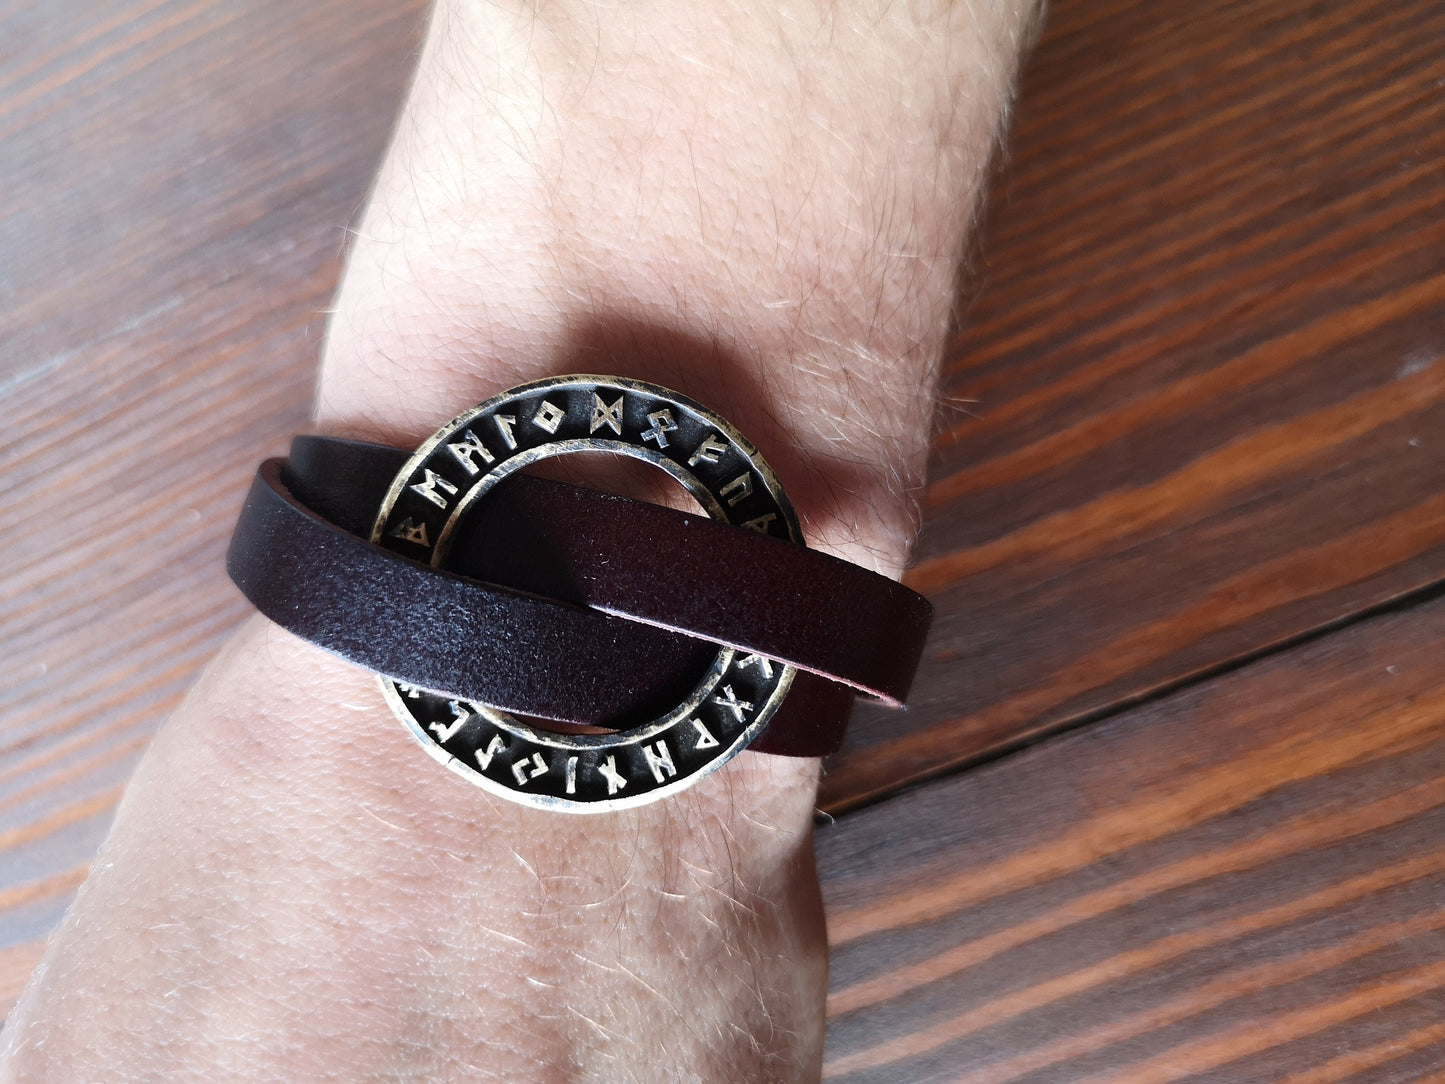 Viking Leather Runic Futhark Bracelet For Men With Stainless Steel Fitting - Baldur Jewelry